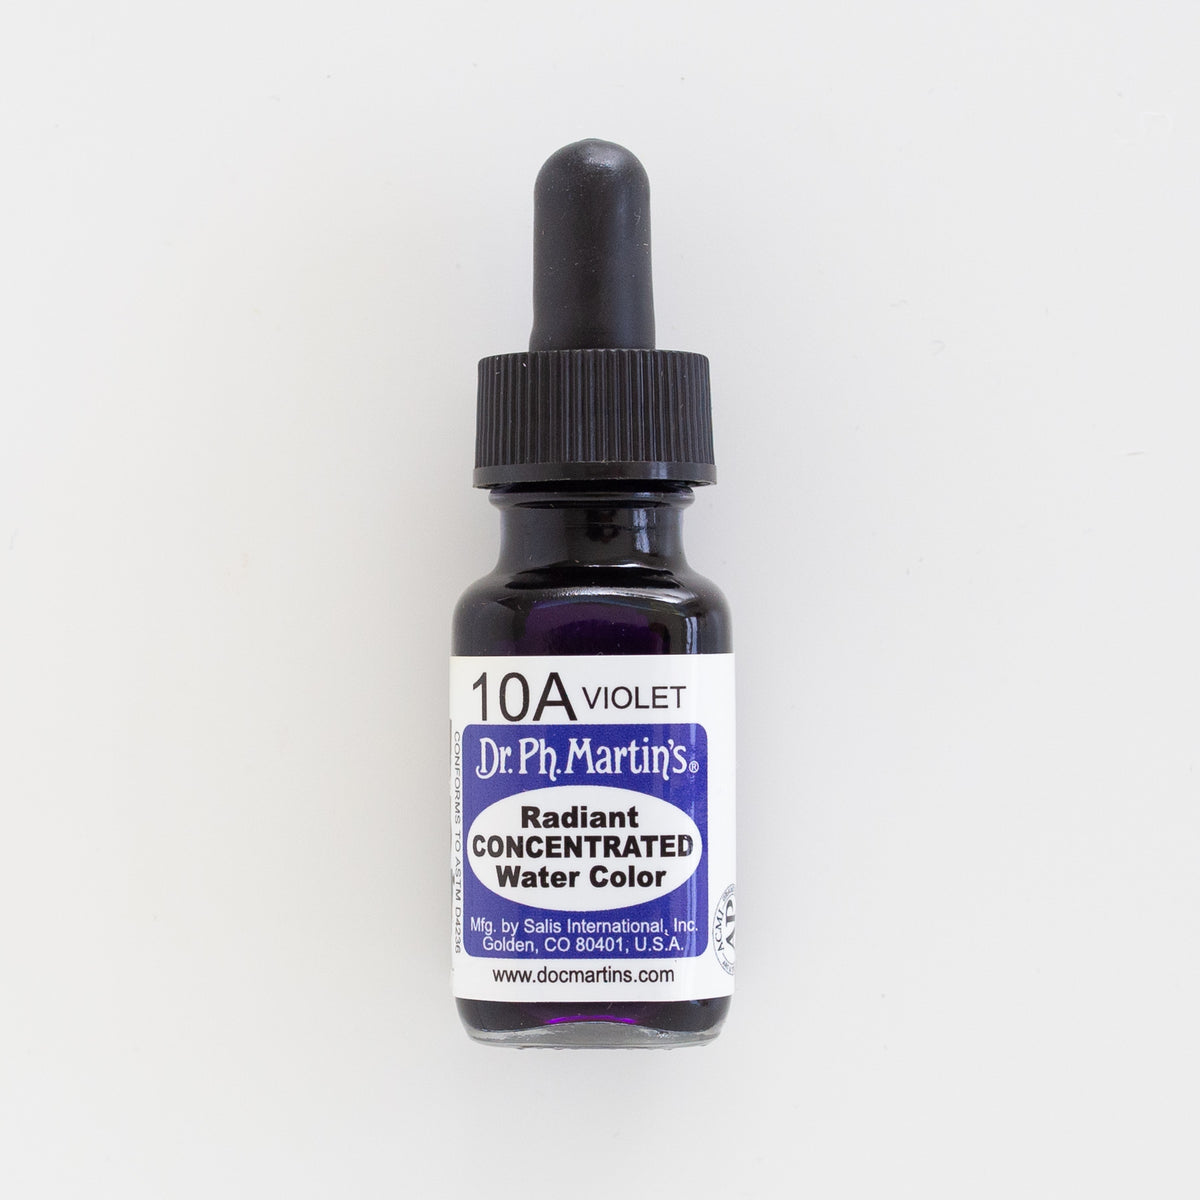 Dr. Ph. Martin’s Radiant Concentrated 10A Violet